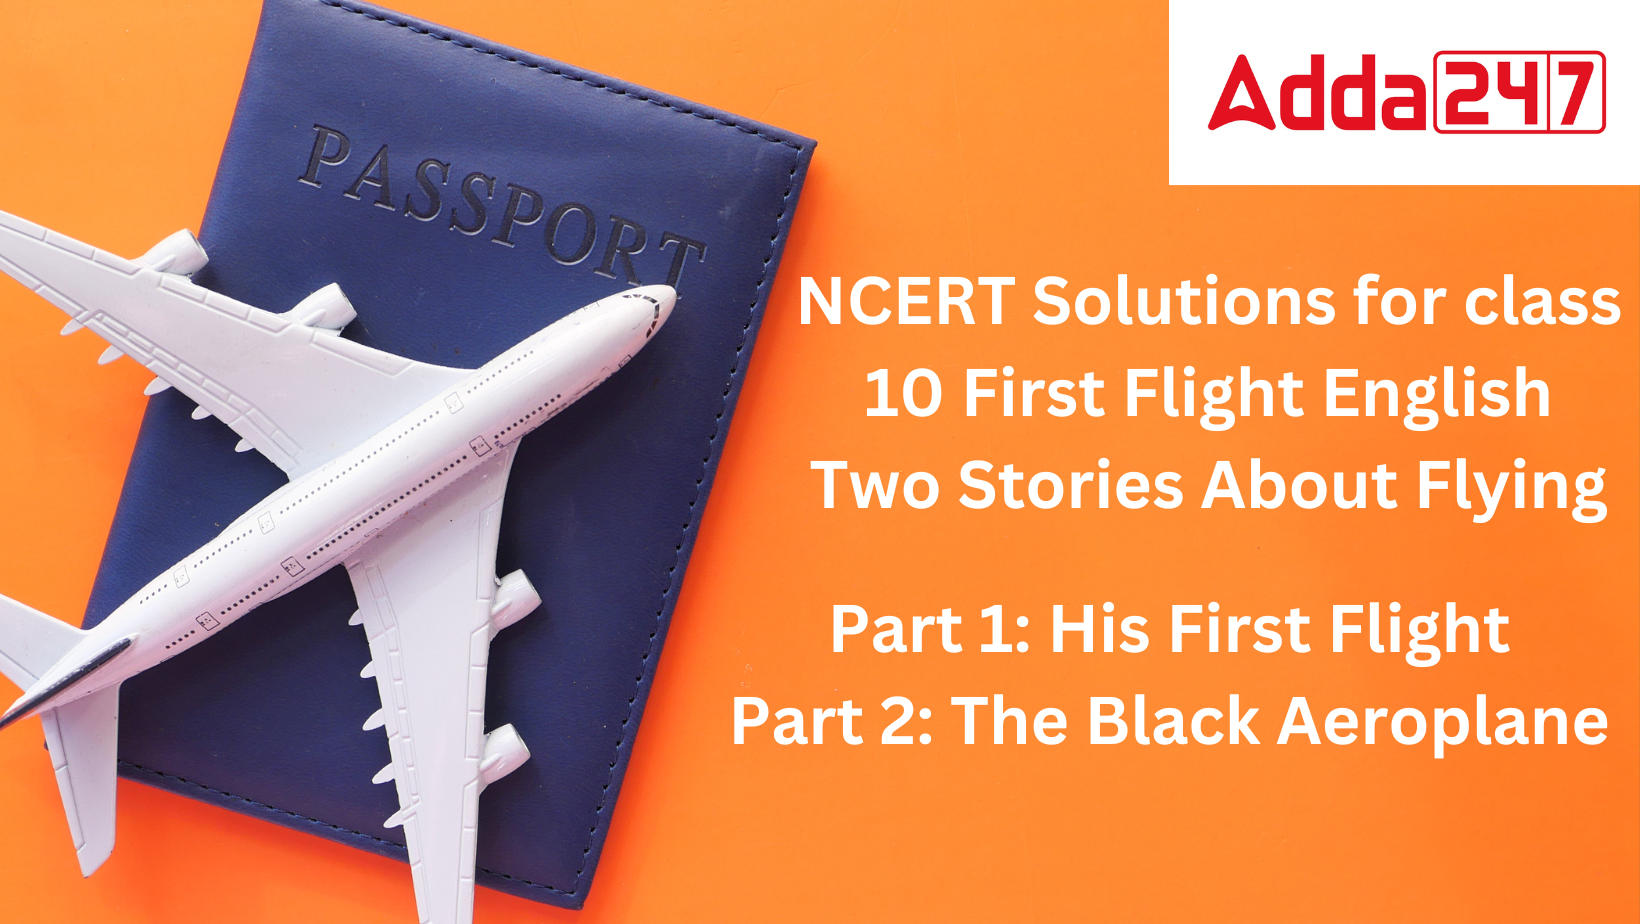 NCERT Solutions for class 10 First Flight English Two Stories About Flying